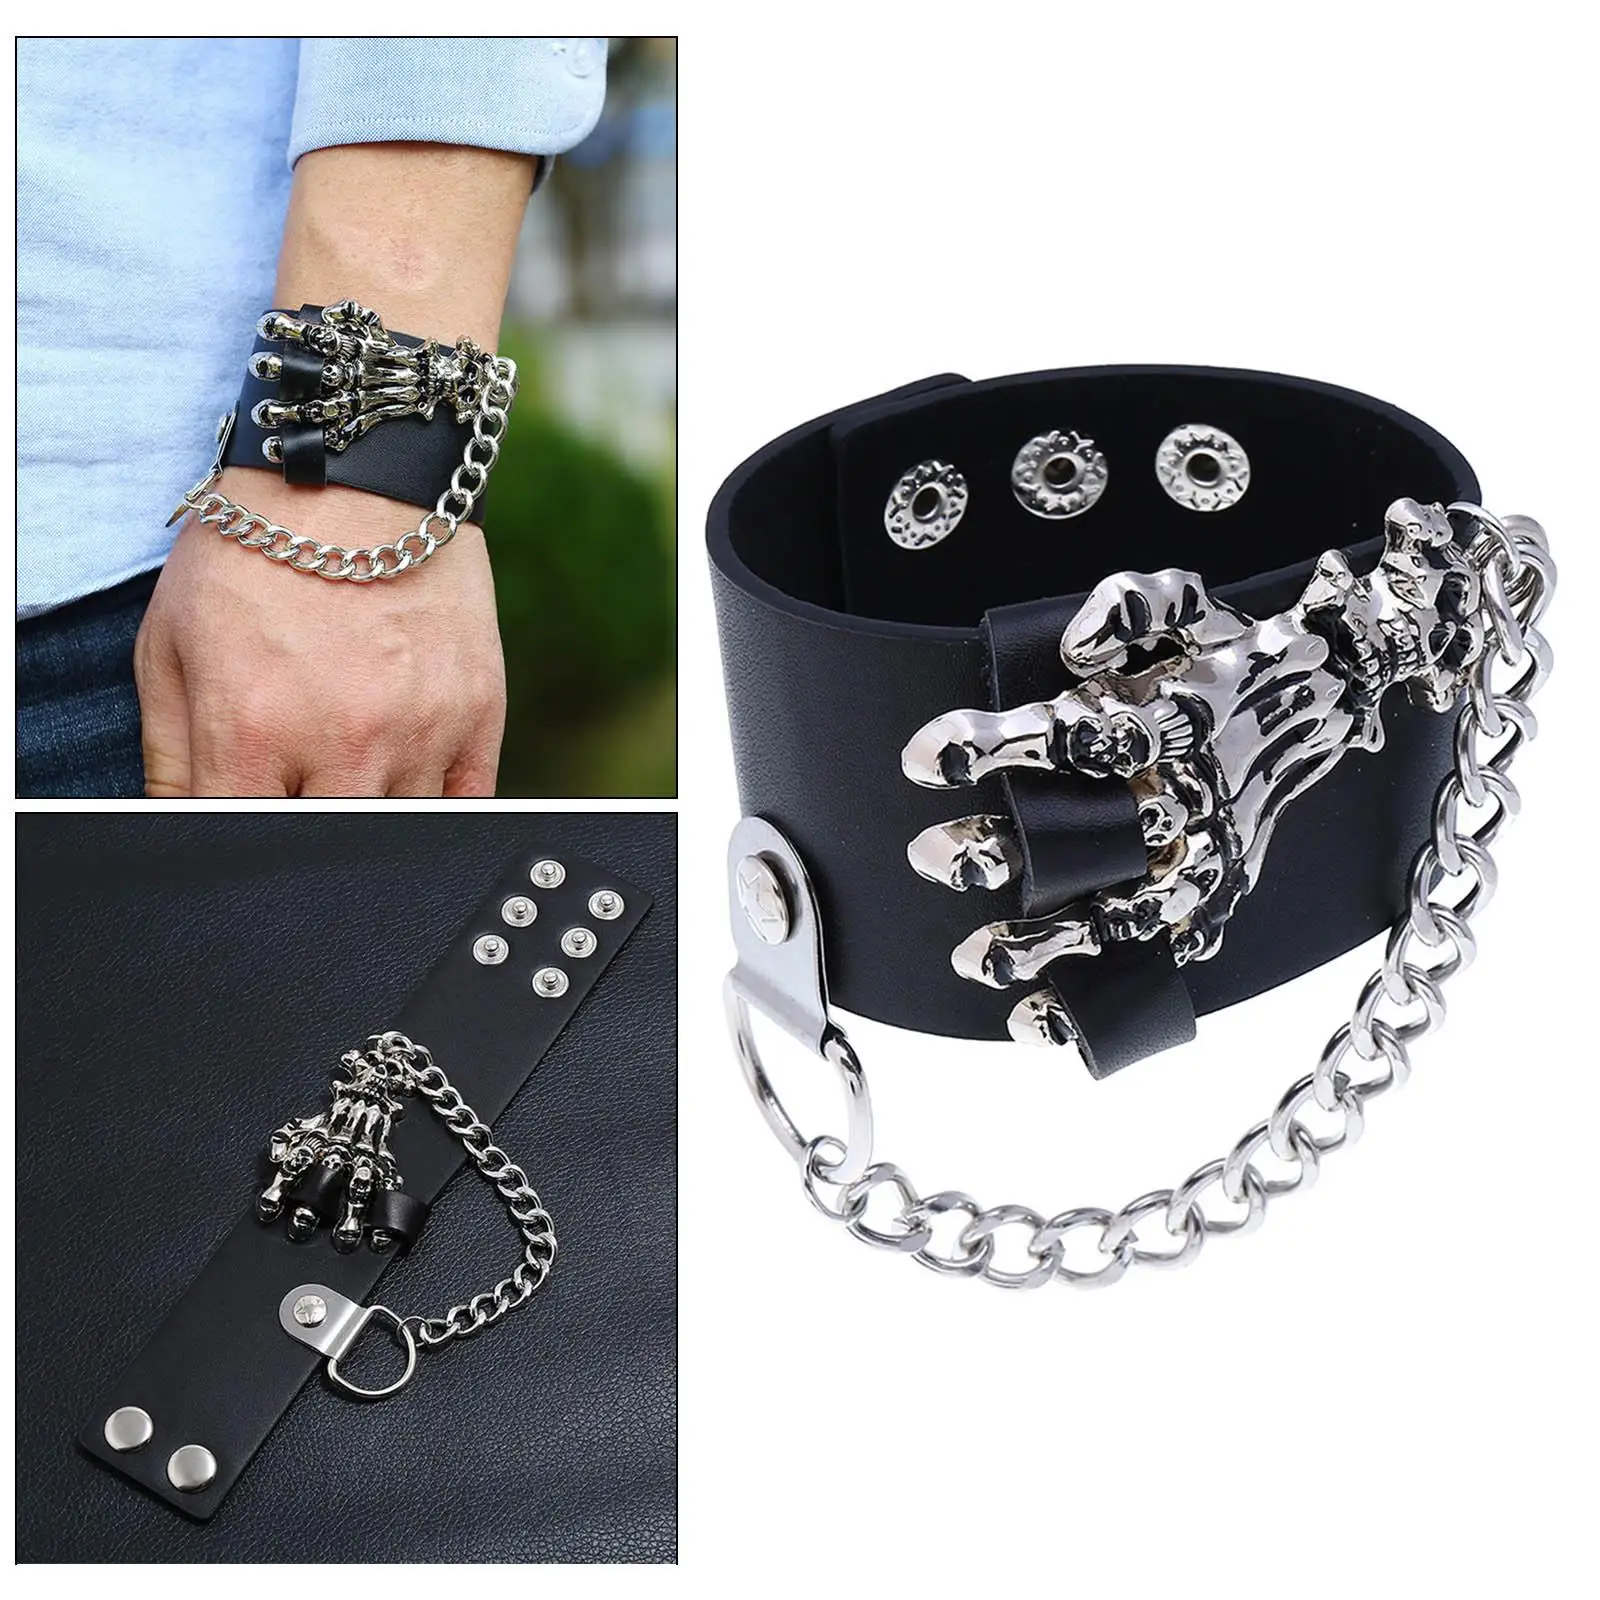 Punk PU Leather Bracelet with Chain Adjustable Gothic Rock Wristbands for Men Women Teen Girls Boys Daily wearing Holiday Prom